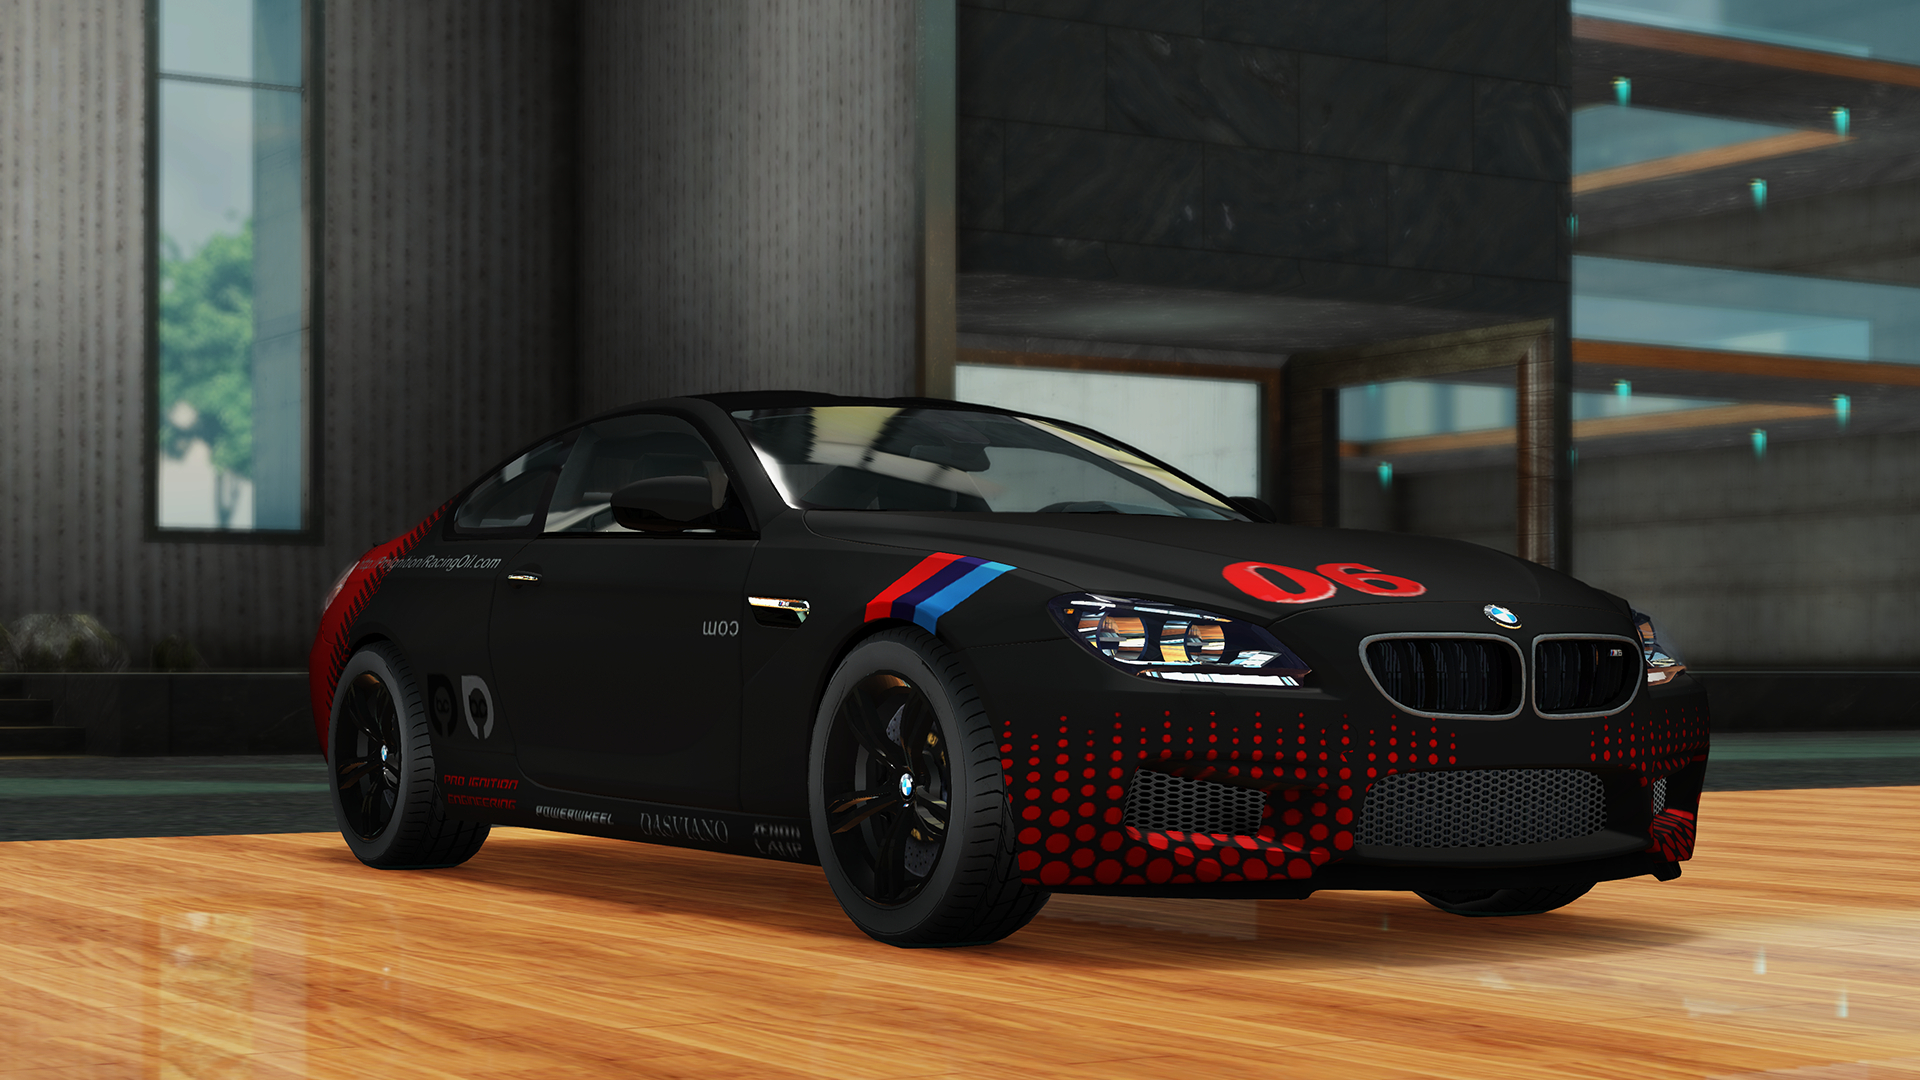 BMW M6 Coupe Matte Livery - Gear.Club Unlimited 2